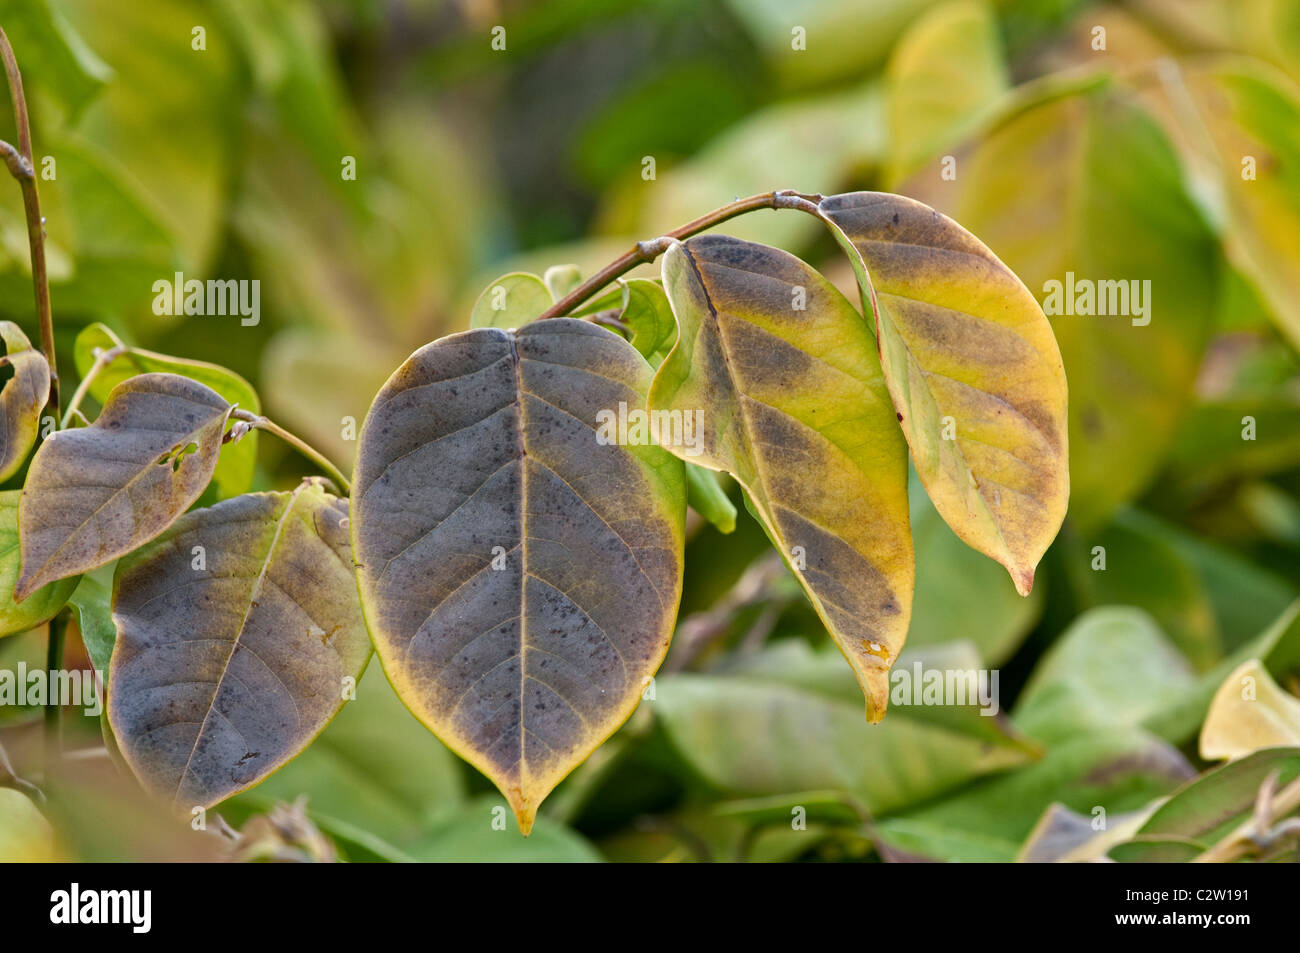 Fish Poison Vine: Dalbergia ecastaphyllum. Florida, USA. Also known as Coin Vine. Used by native Americans for catching fish Stock Photo